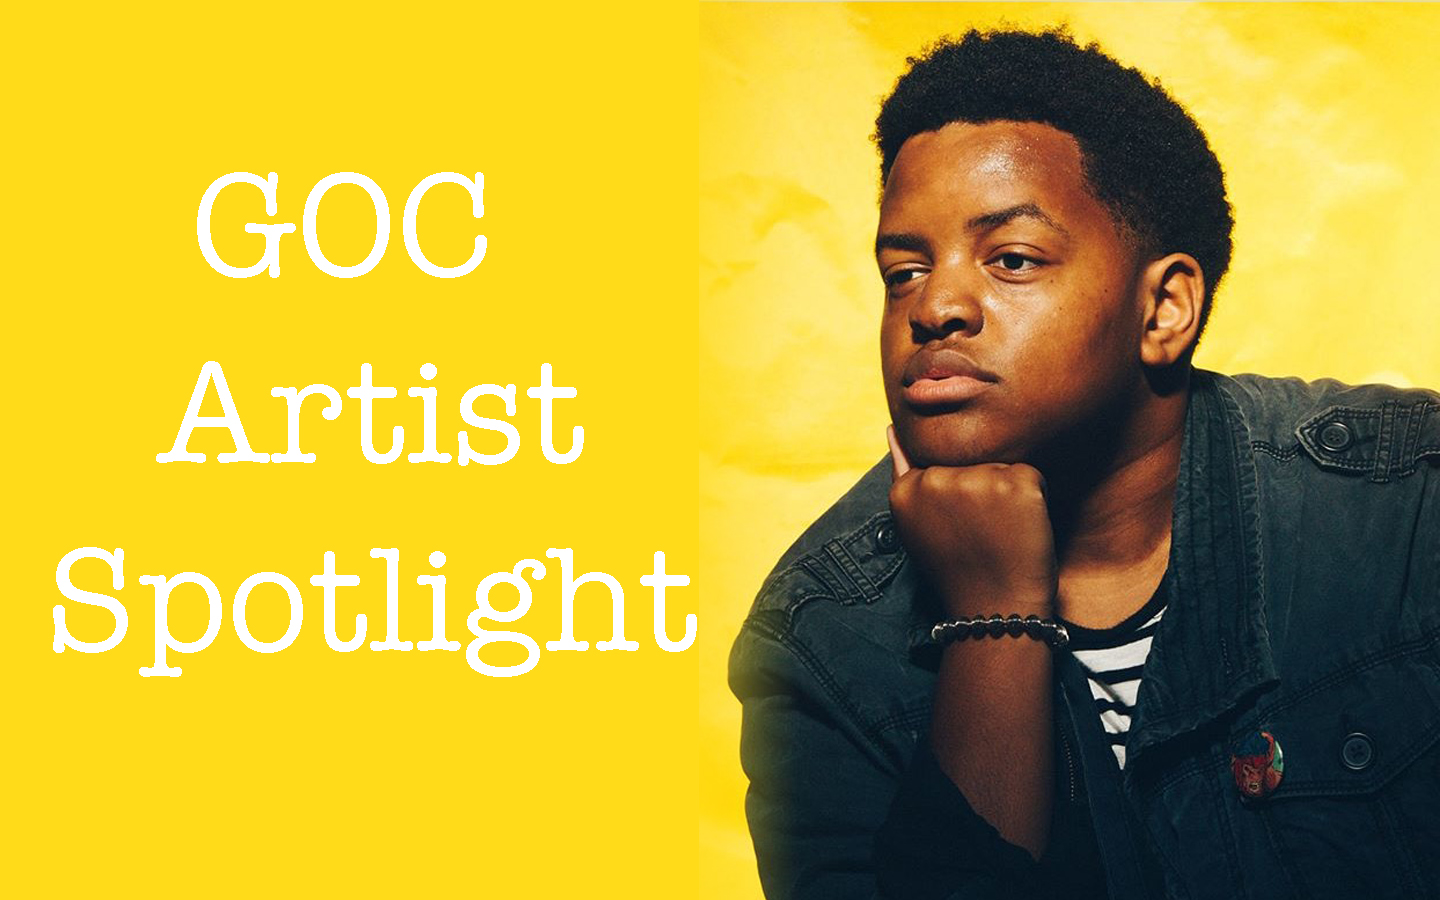 Artists of Color: An Interview with Ky Williams on His Art and Upcoming Comic Book